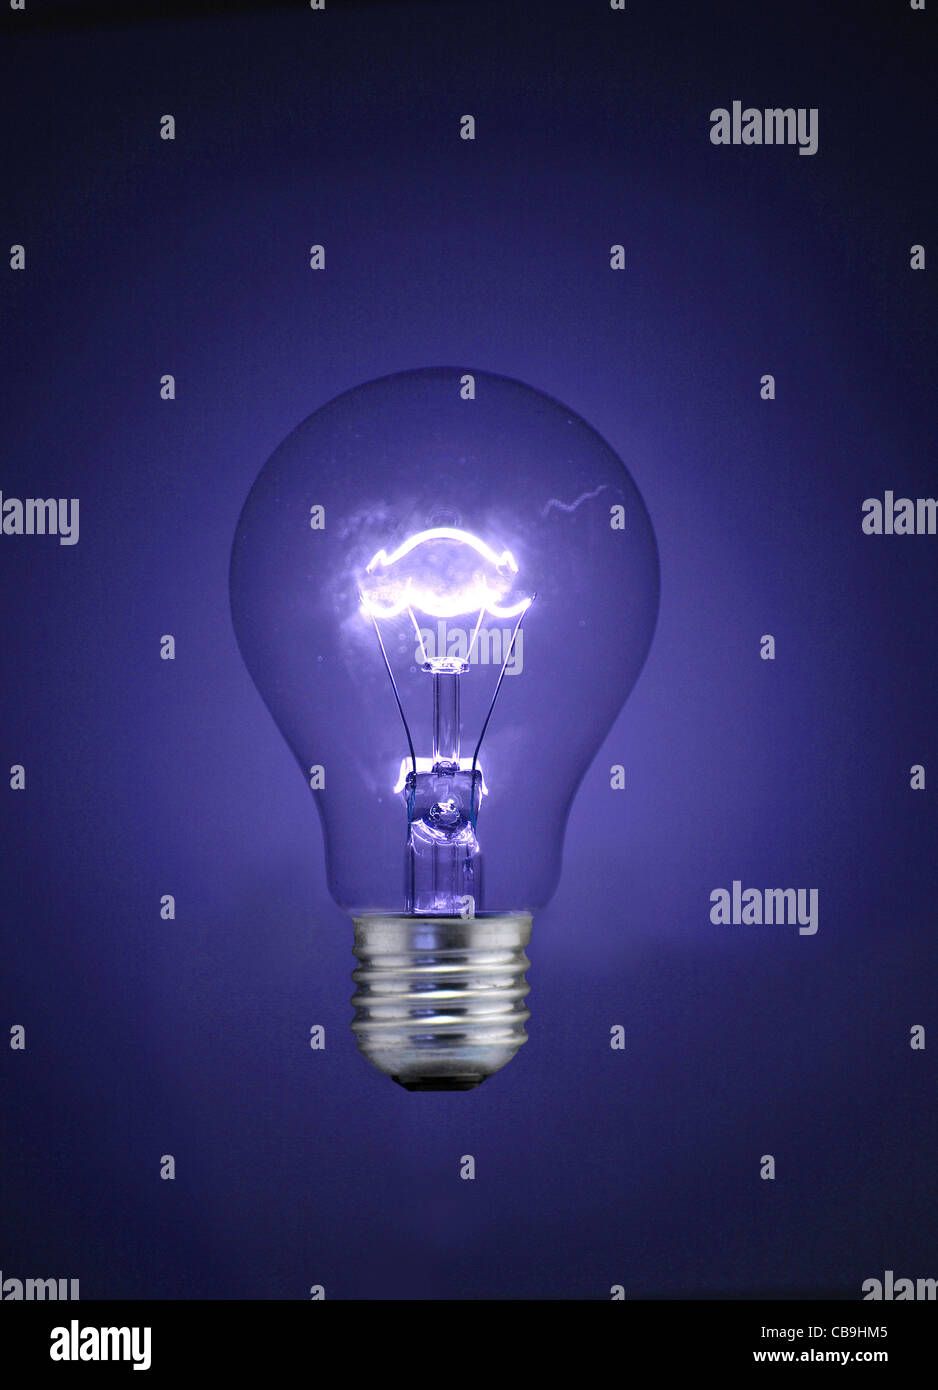 A traditional tungsten, screw-fit  light bulb. Illuminated - though not visibly connected to an electrical supply. Stock Photo